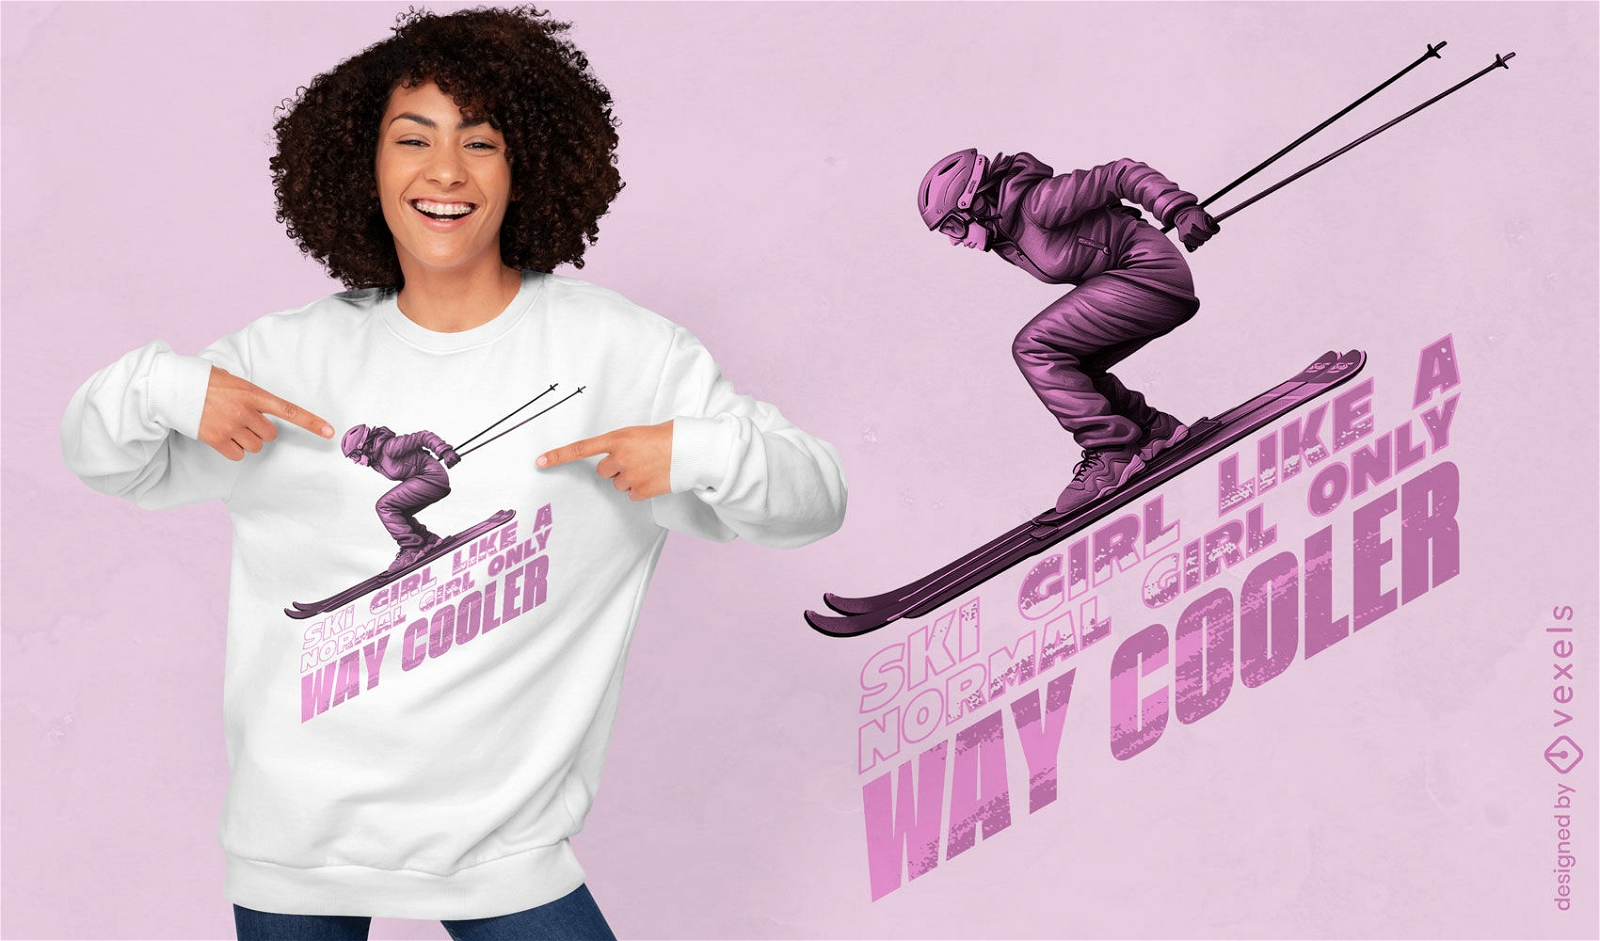 Skier action quote t-shirt design